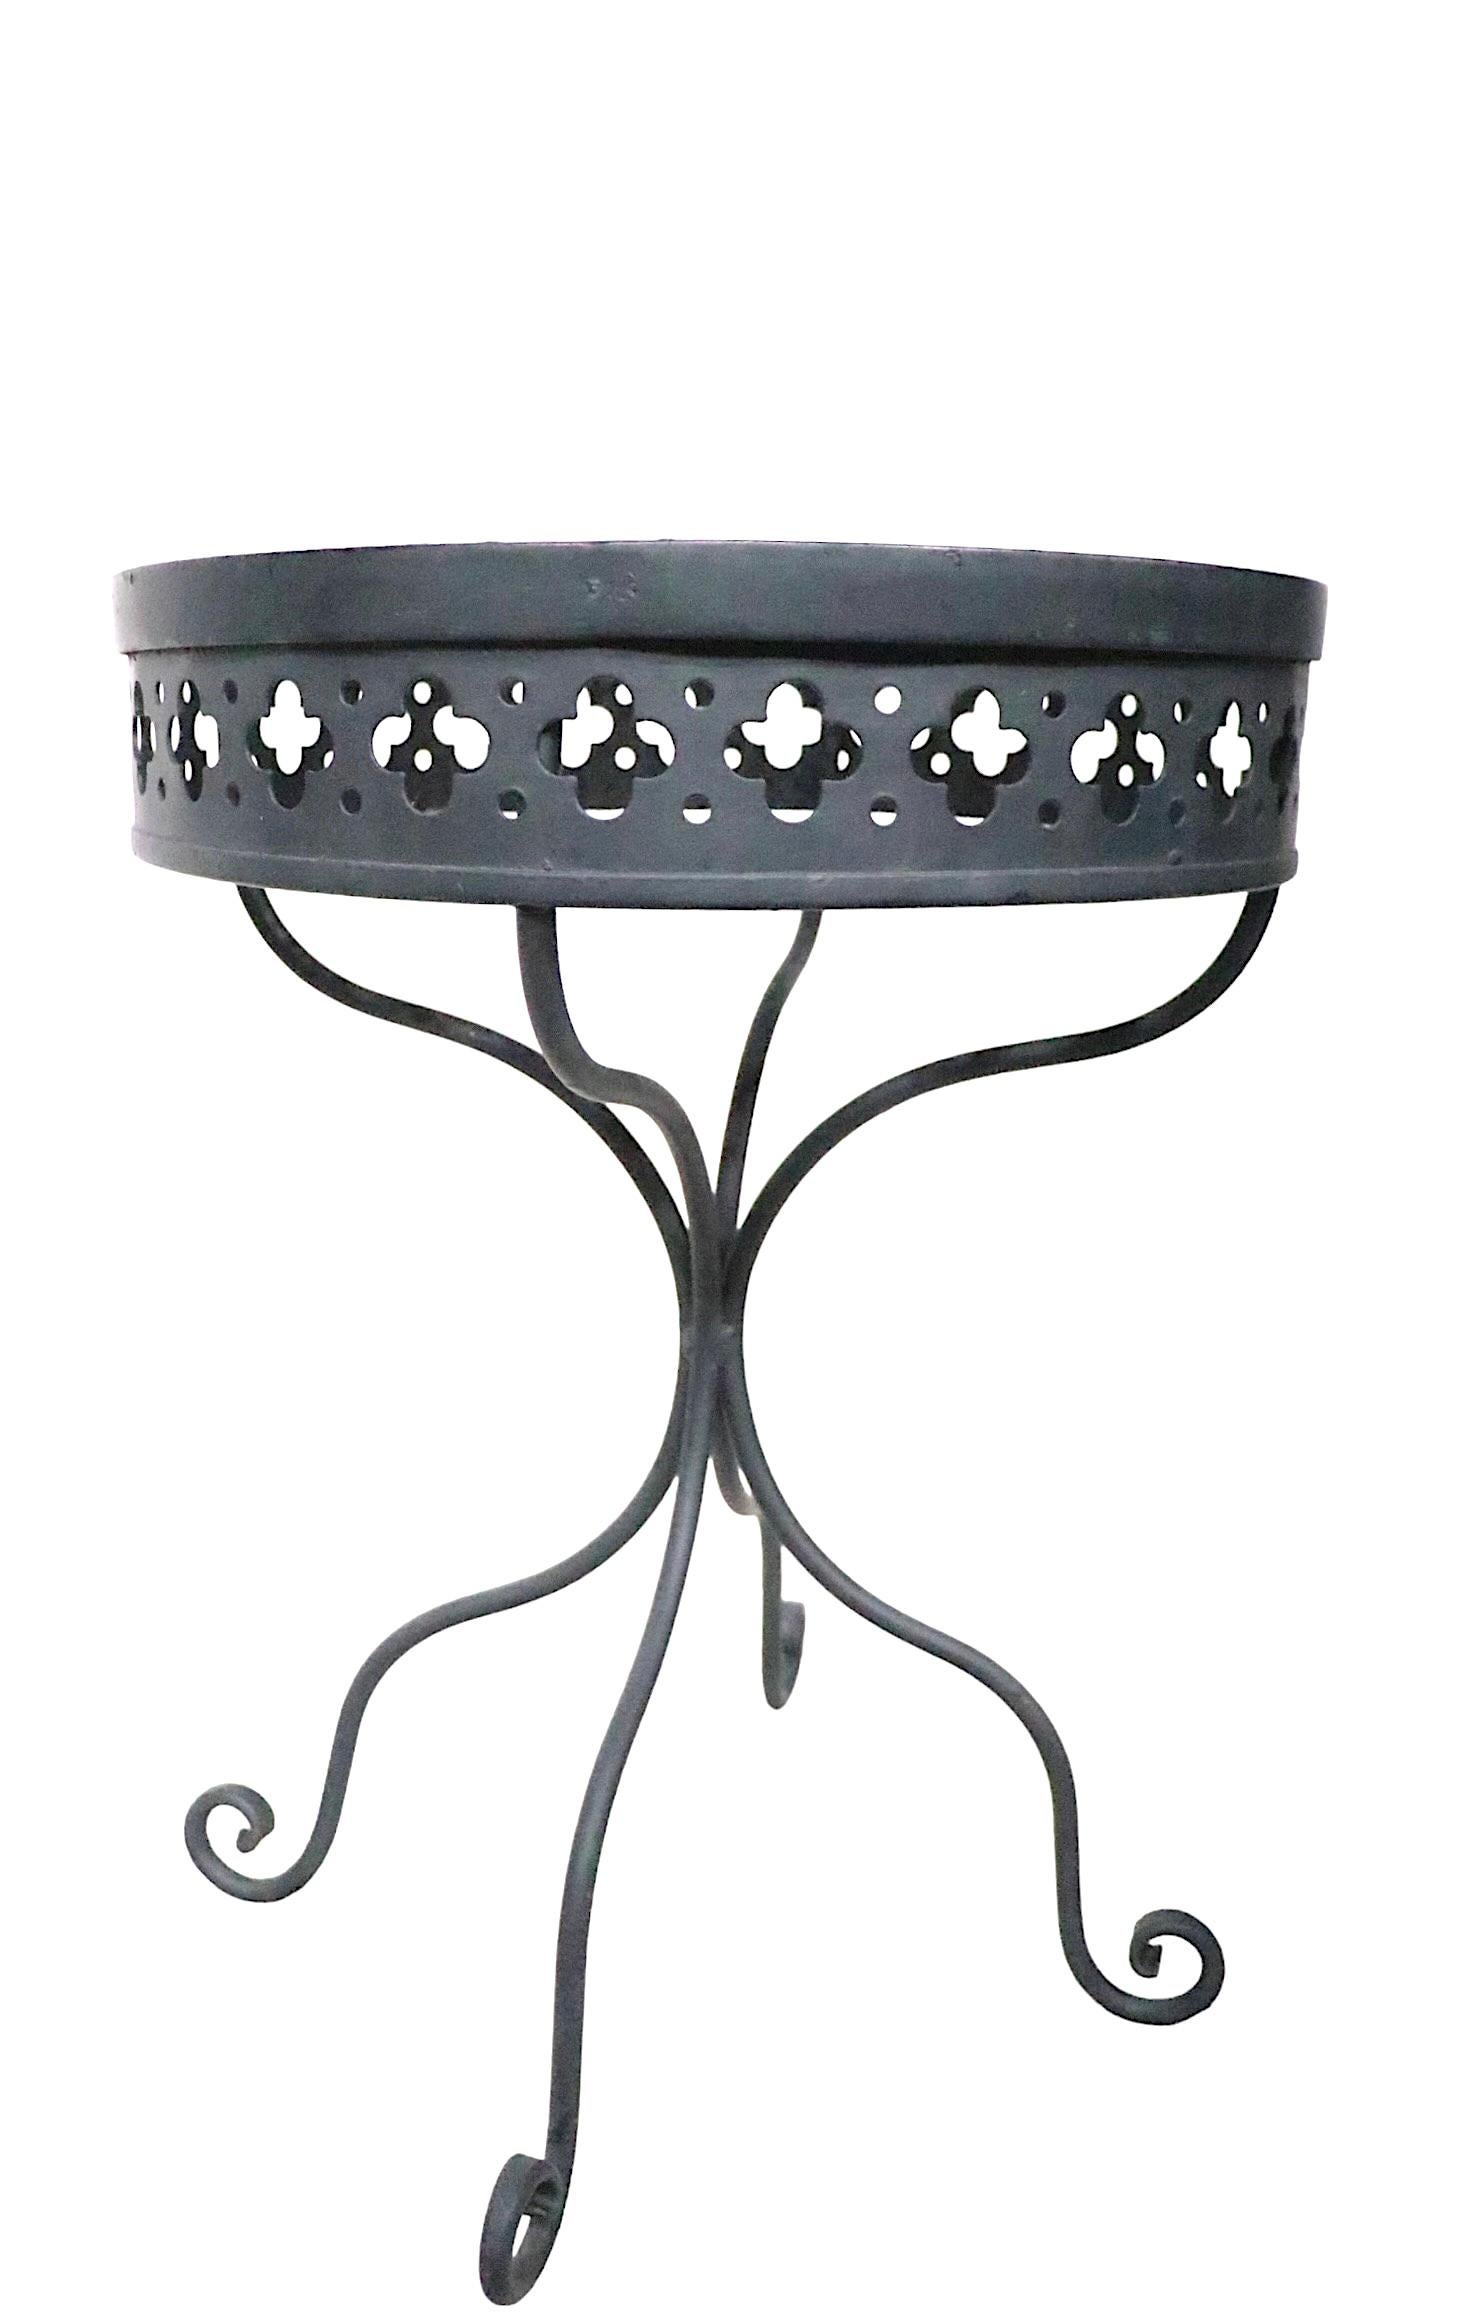 Rare Taj Mahal pattern garden table by Salterini. The table features a circular metal mesh top, with decorative quatrefoil pattern skirt, on a wrought iron pedestal base. This example is in very good condition, free of damage or repairs, it is